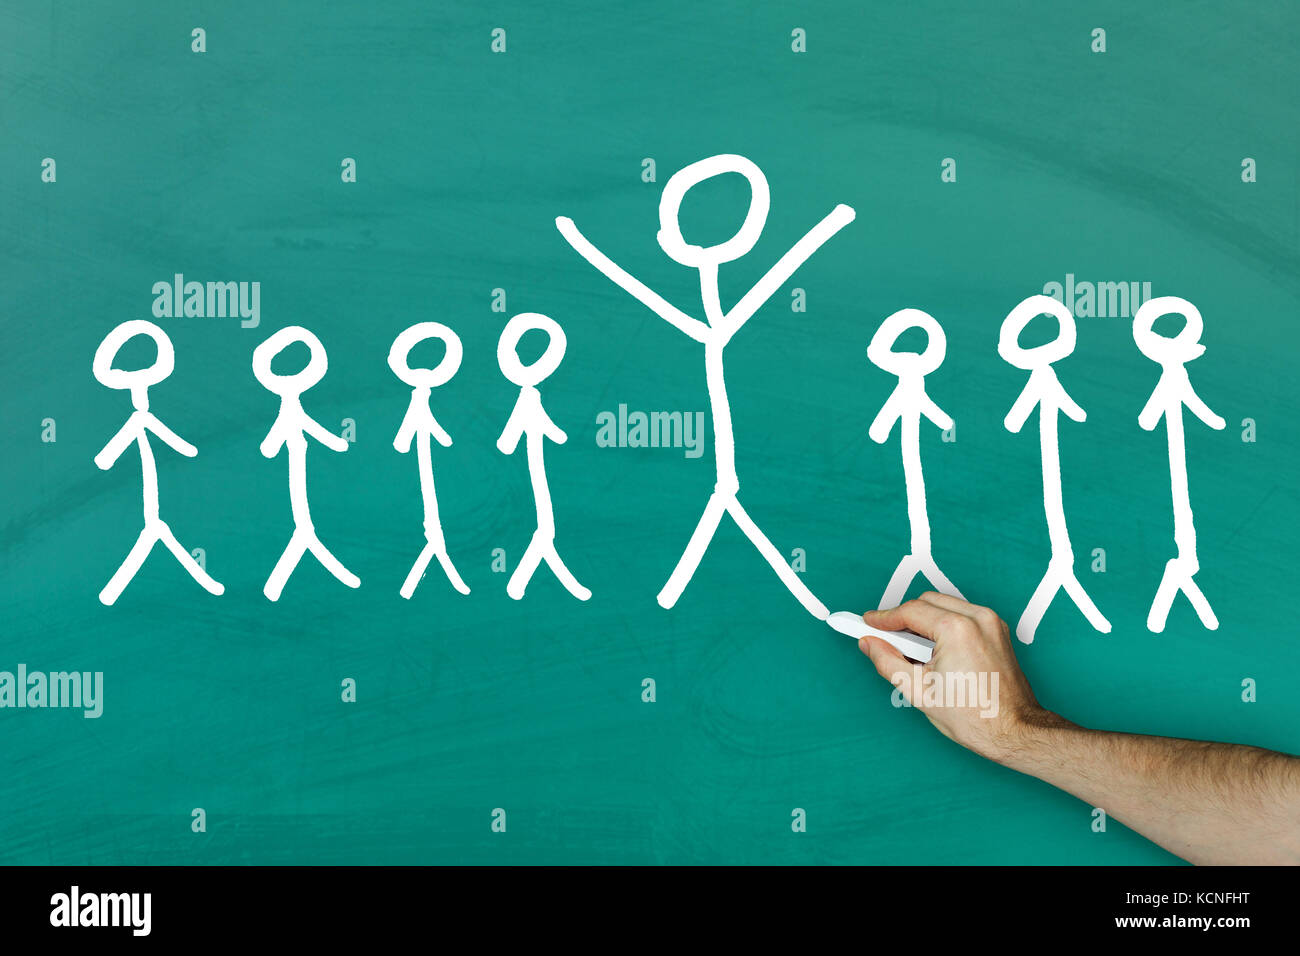 Standing out from crowd concept on green blackboard Stock Photo